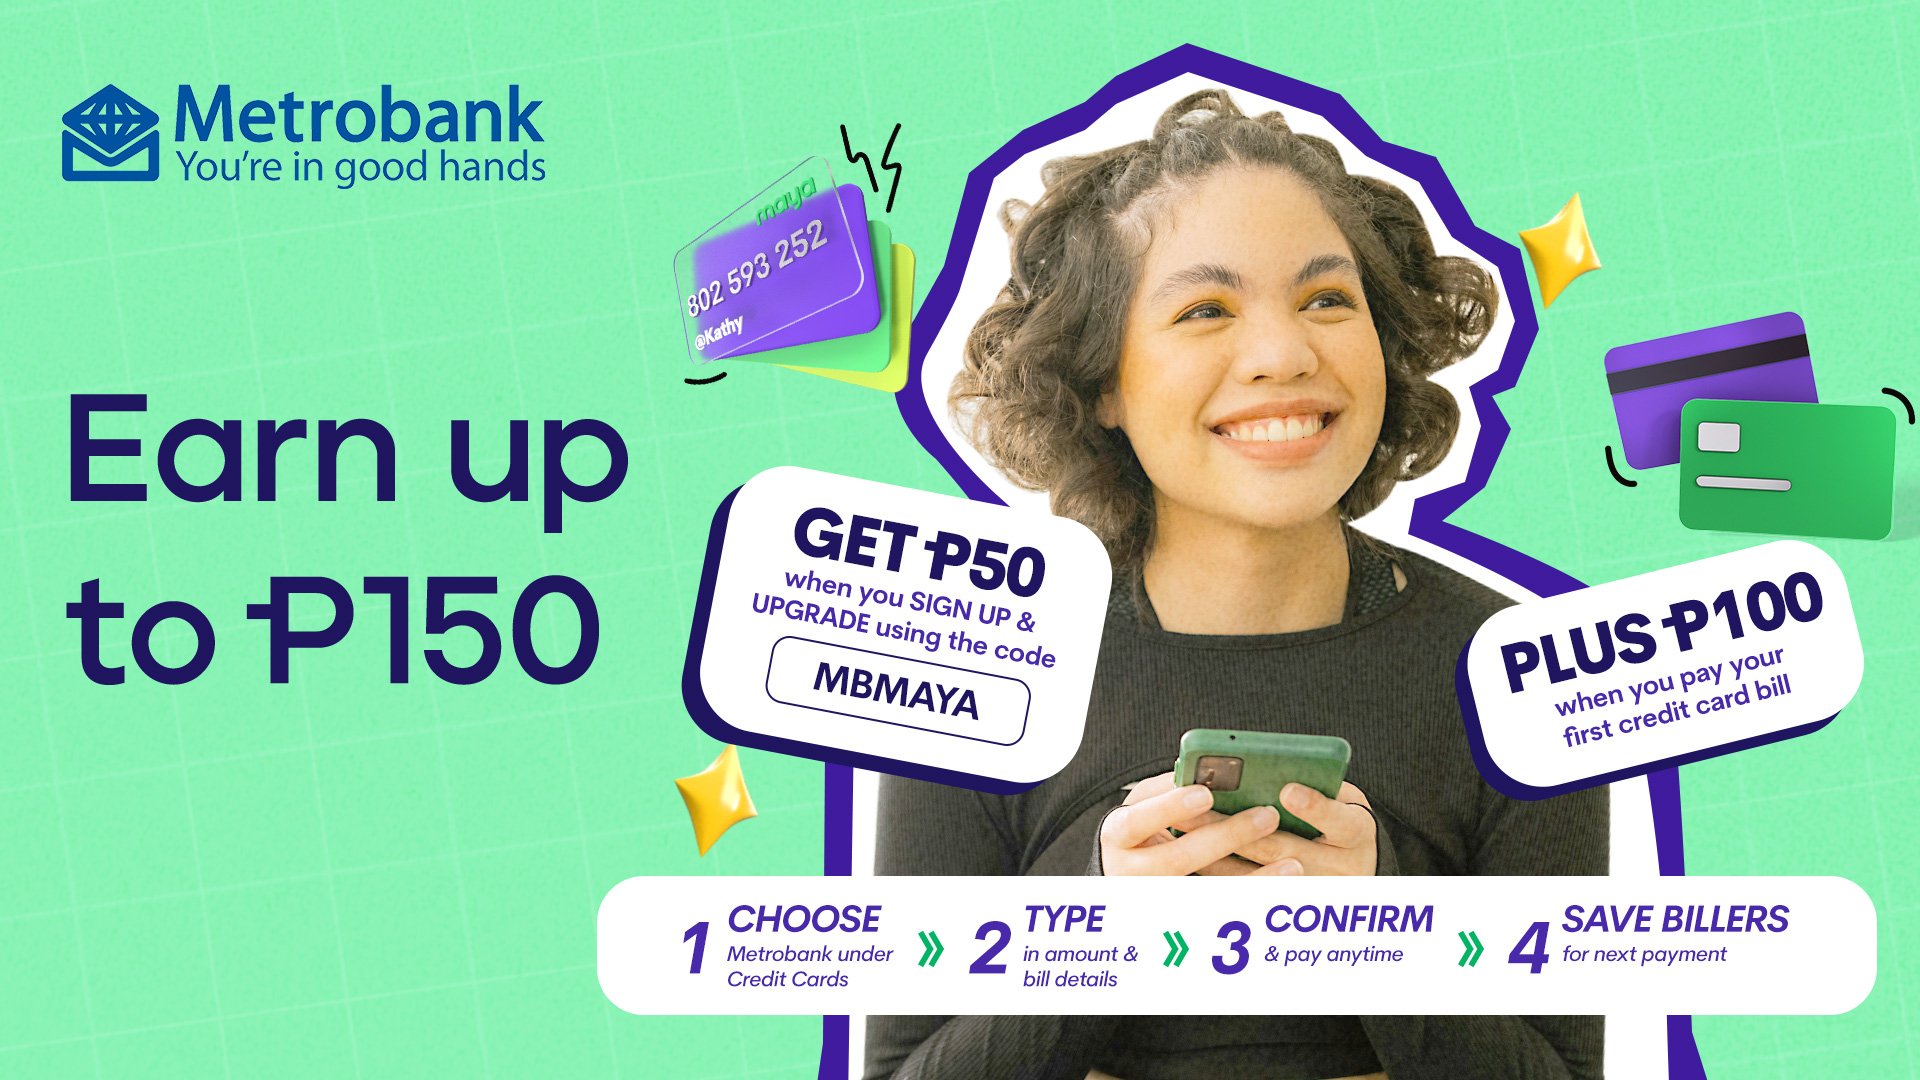 New PayMaya users earn P150 on first Metrobank credit card bill payment